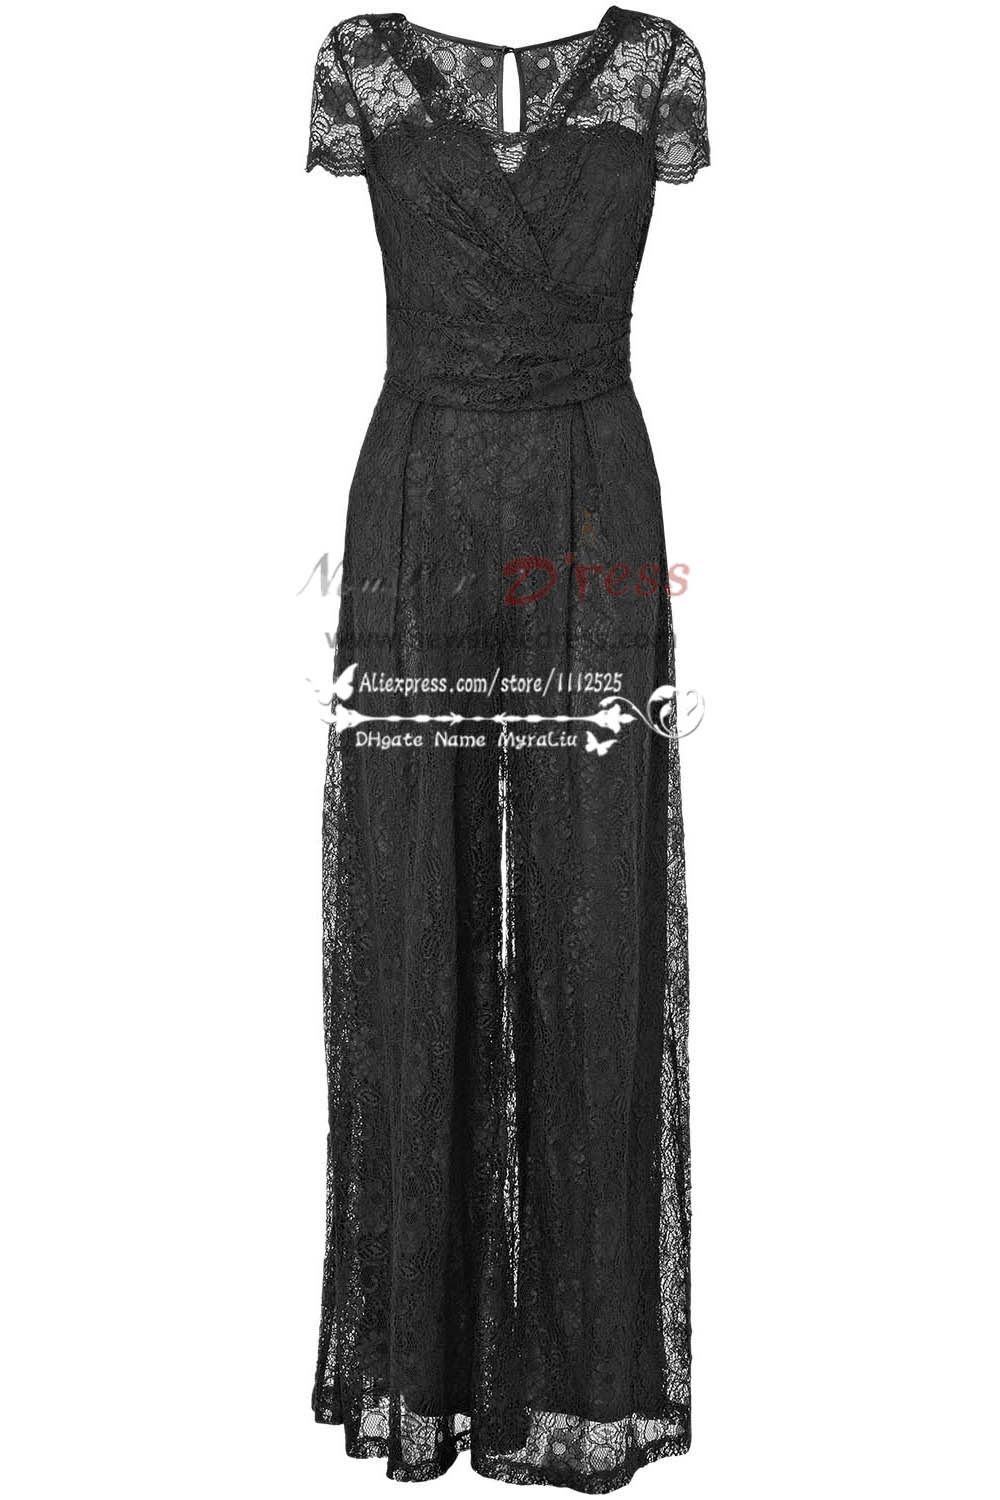 Modern sexy black Prom Jumpsuit dress with lace nmo-228 - Mother's Pant ...